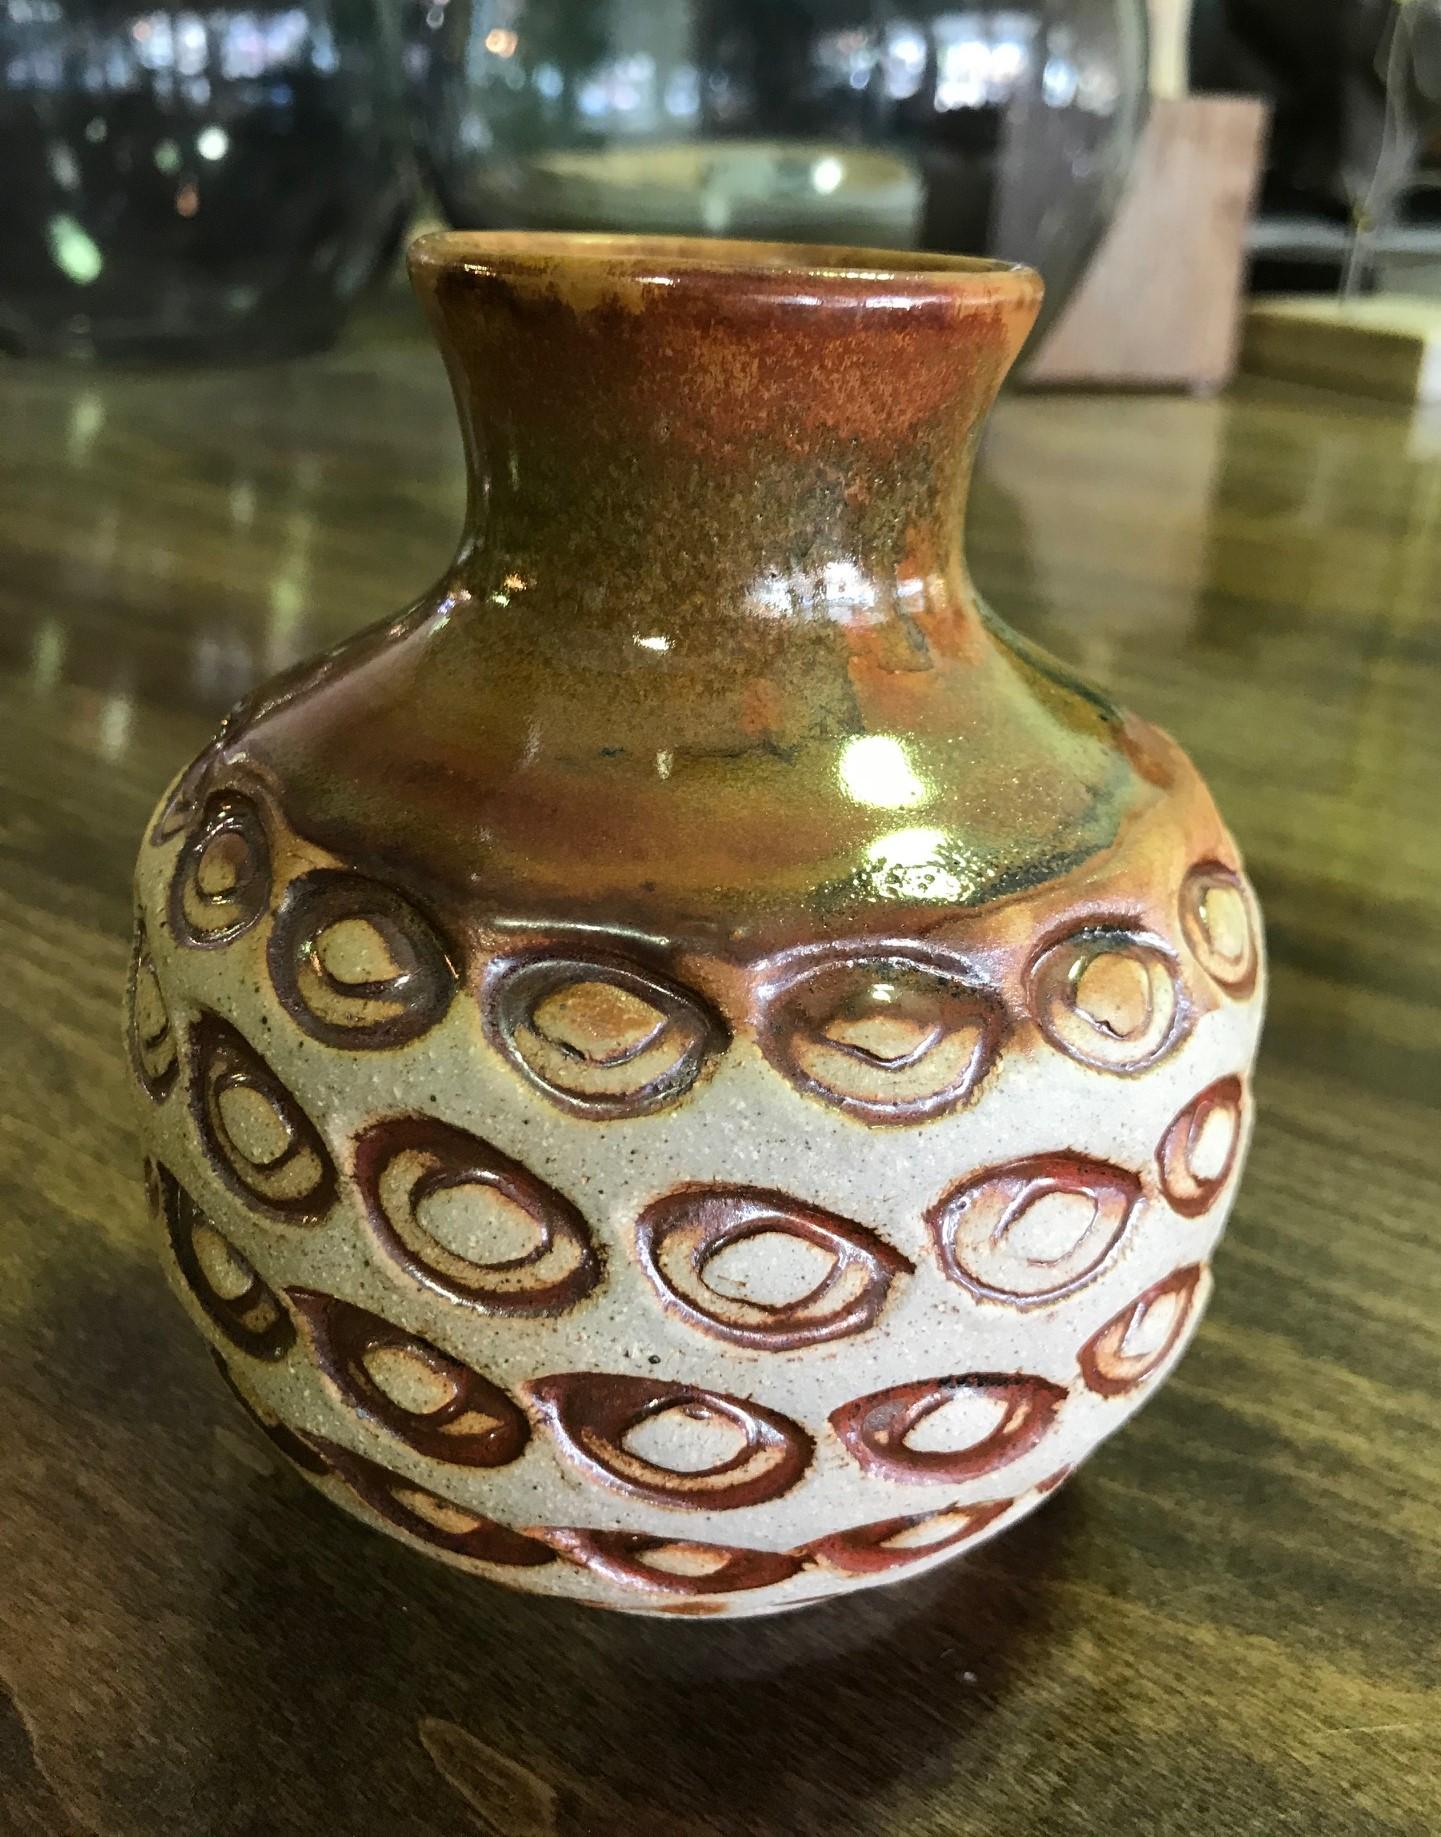 A fantastic, midcentury oval eye patterned pottery vase by renowned master potter F. Carlton Ball.

Ball, who studied with Glen Lukens, taught at University of Southern California between 1956-1967 and later at University of Puget Sound, Tacoma,